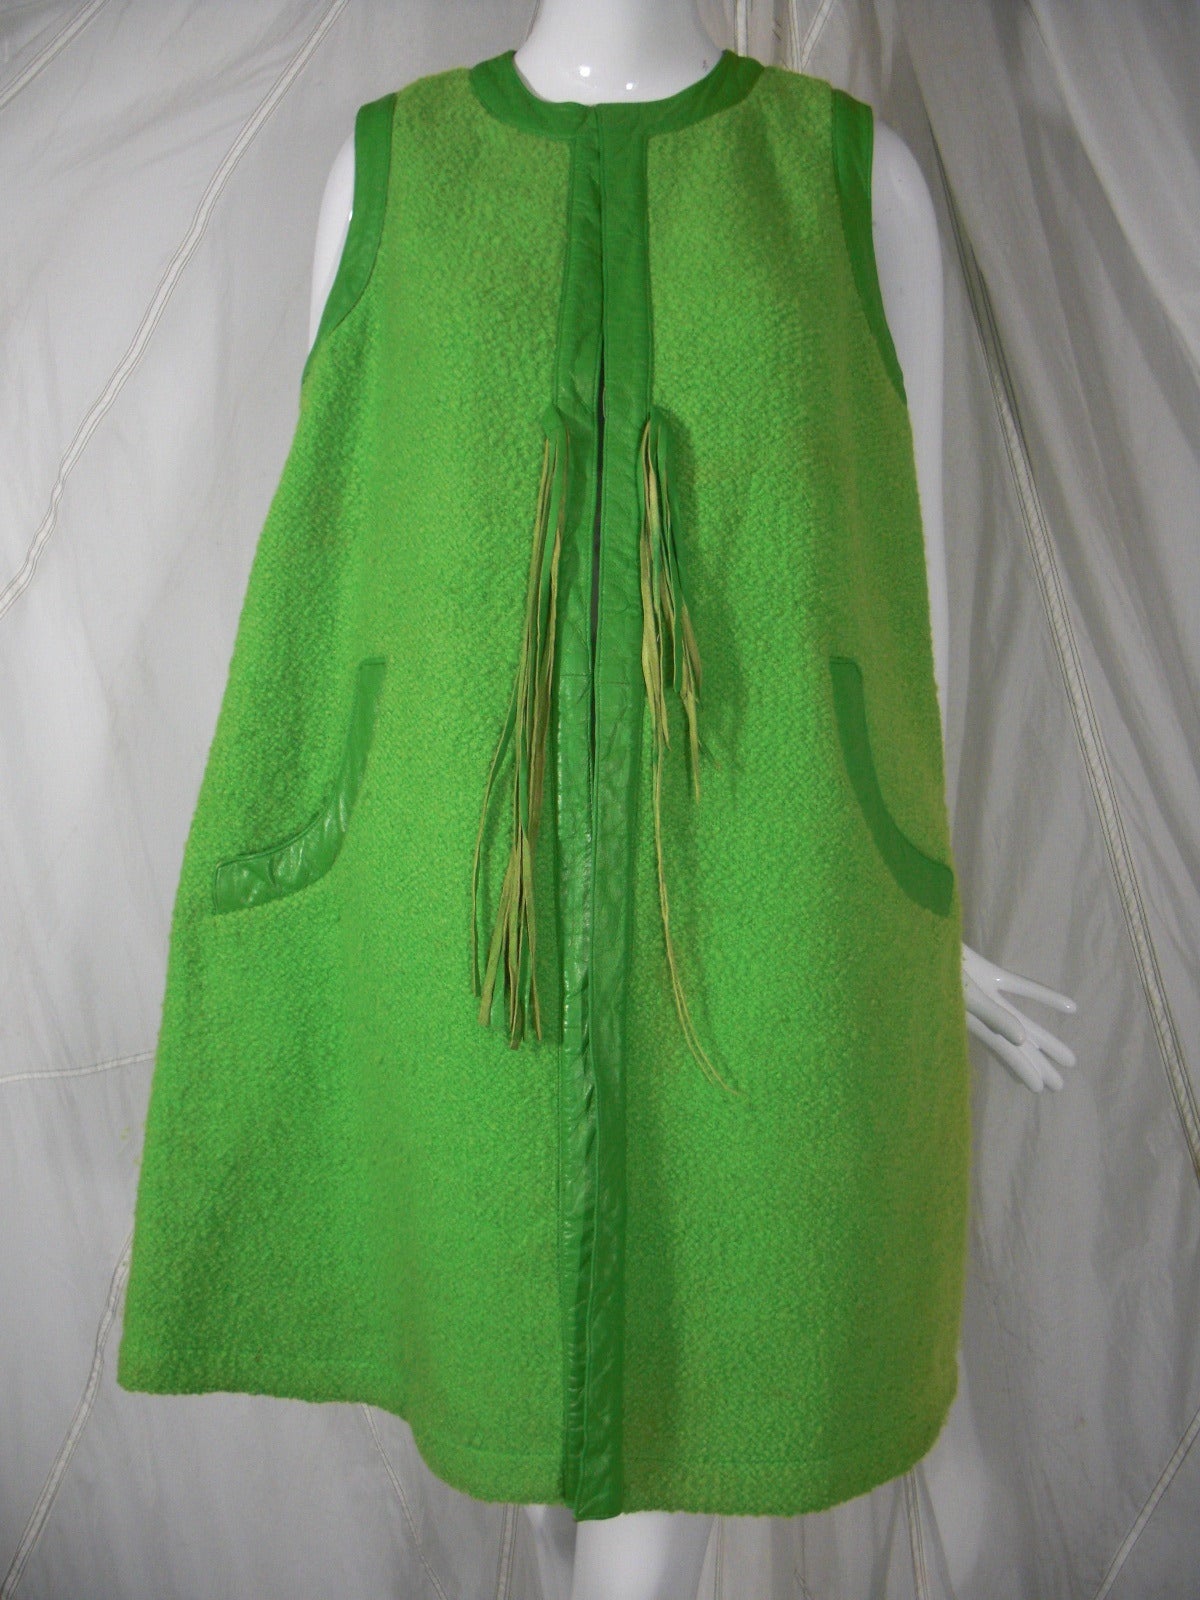 1960s Bonnie Cashin Apple Green Wool and Leather Trimmed Vest 1